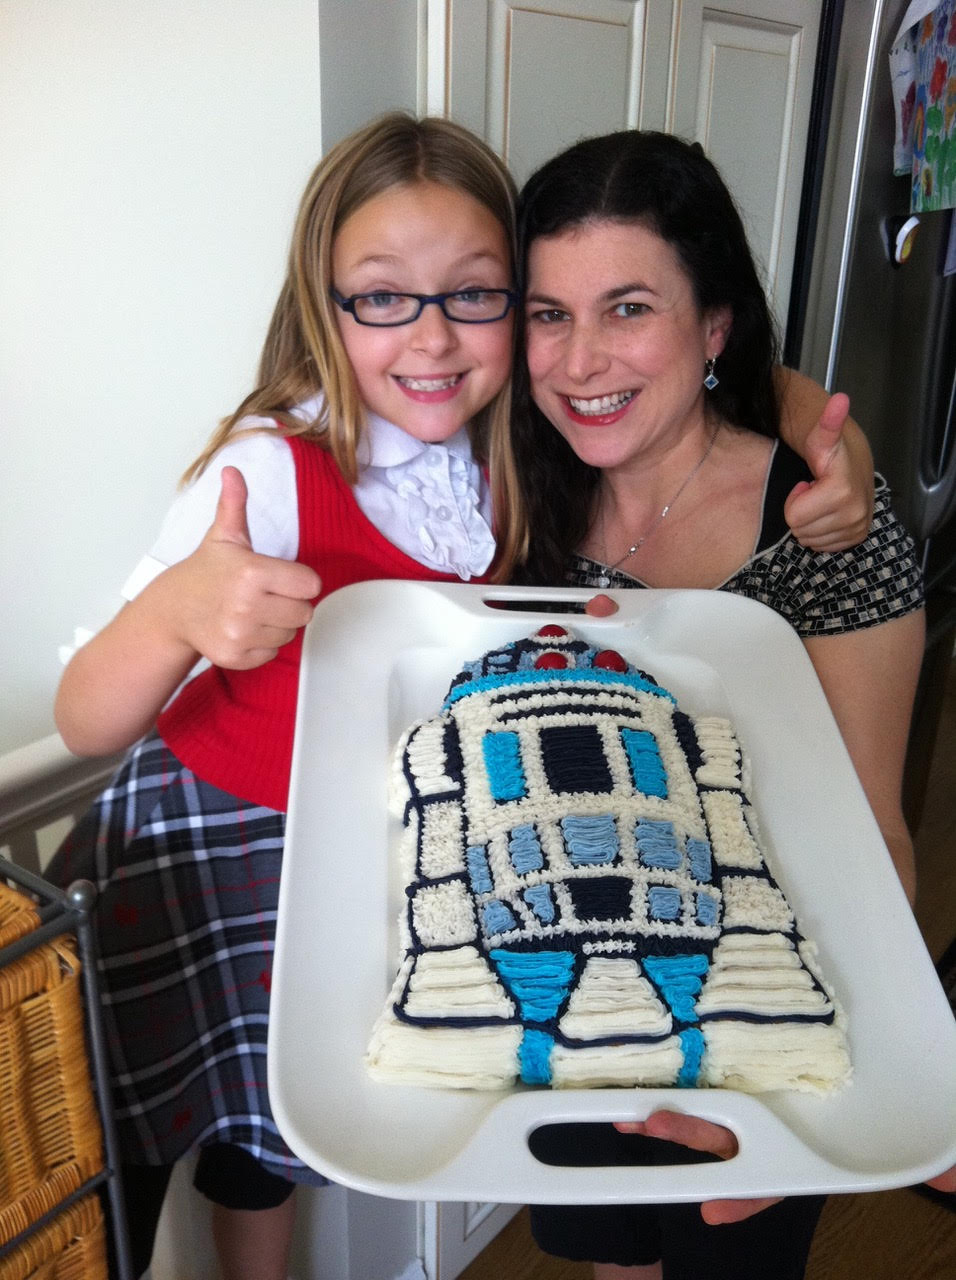 Carrie Goldman and her daughter with a custom R2-D2 cake